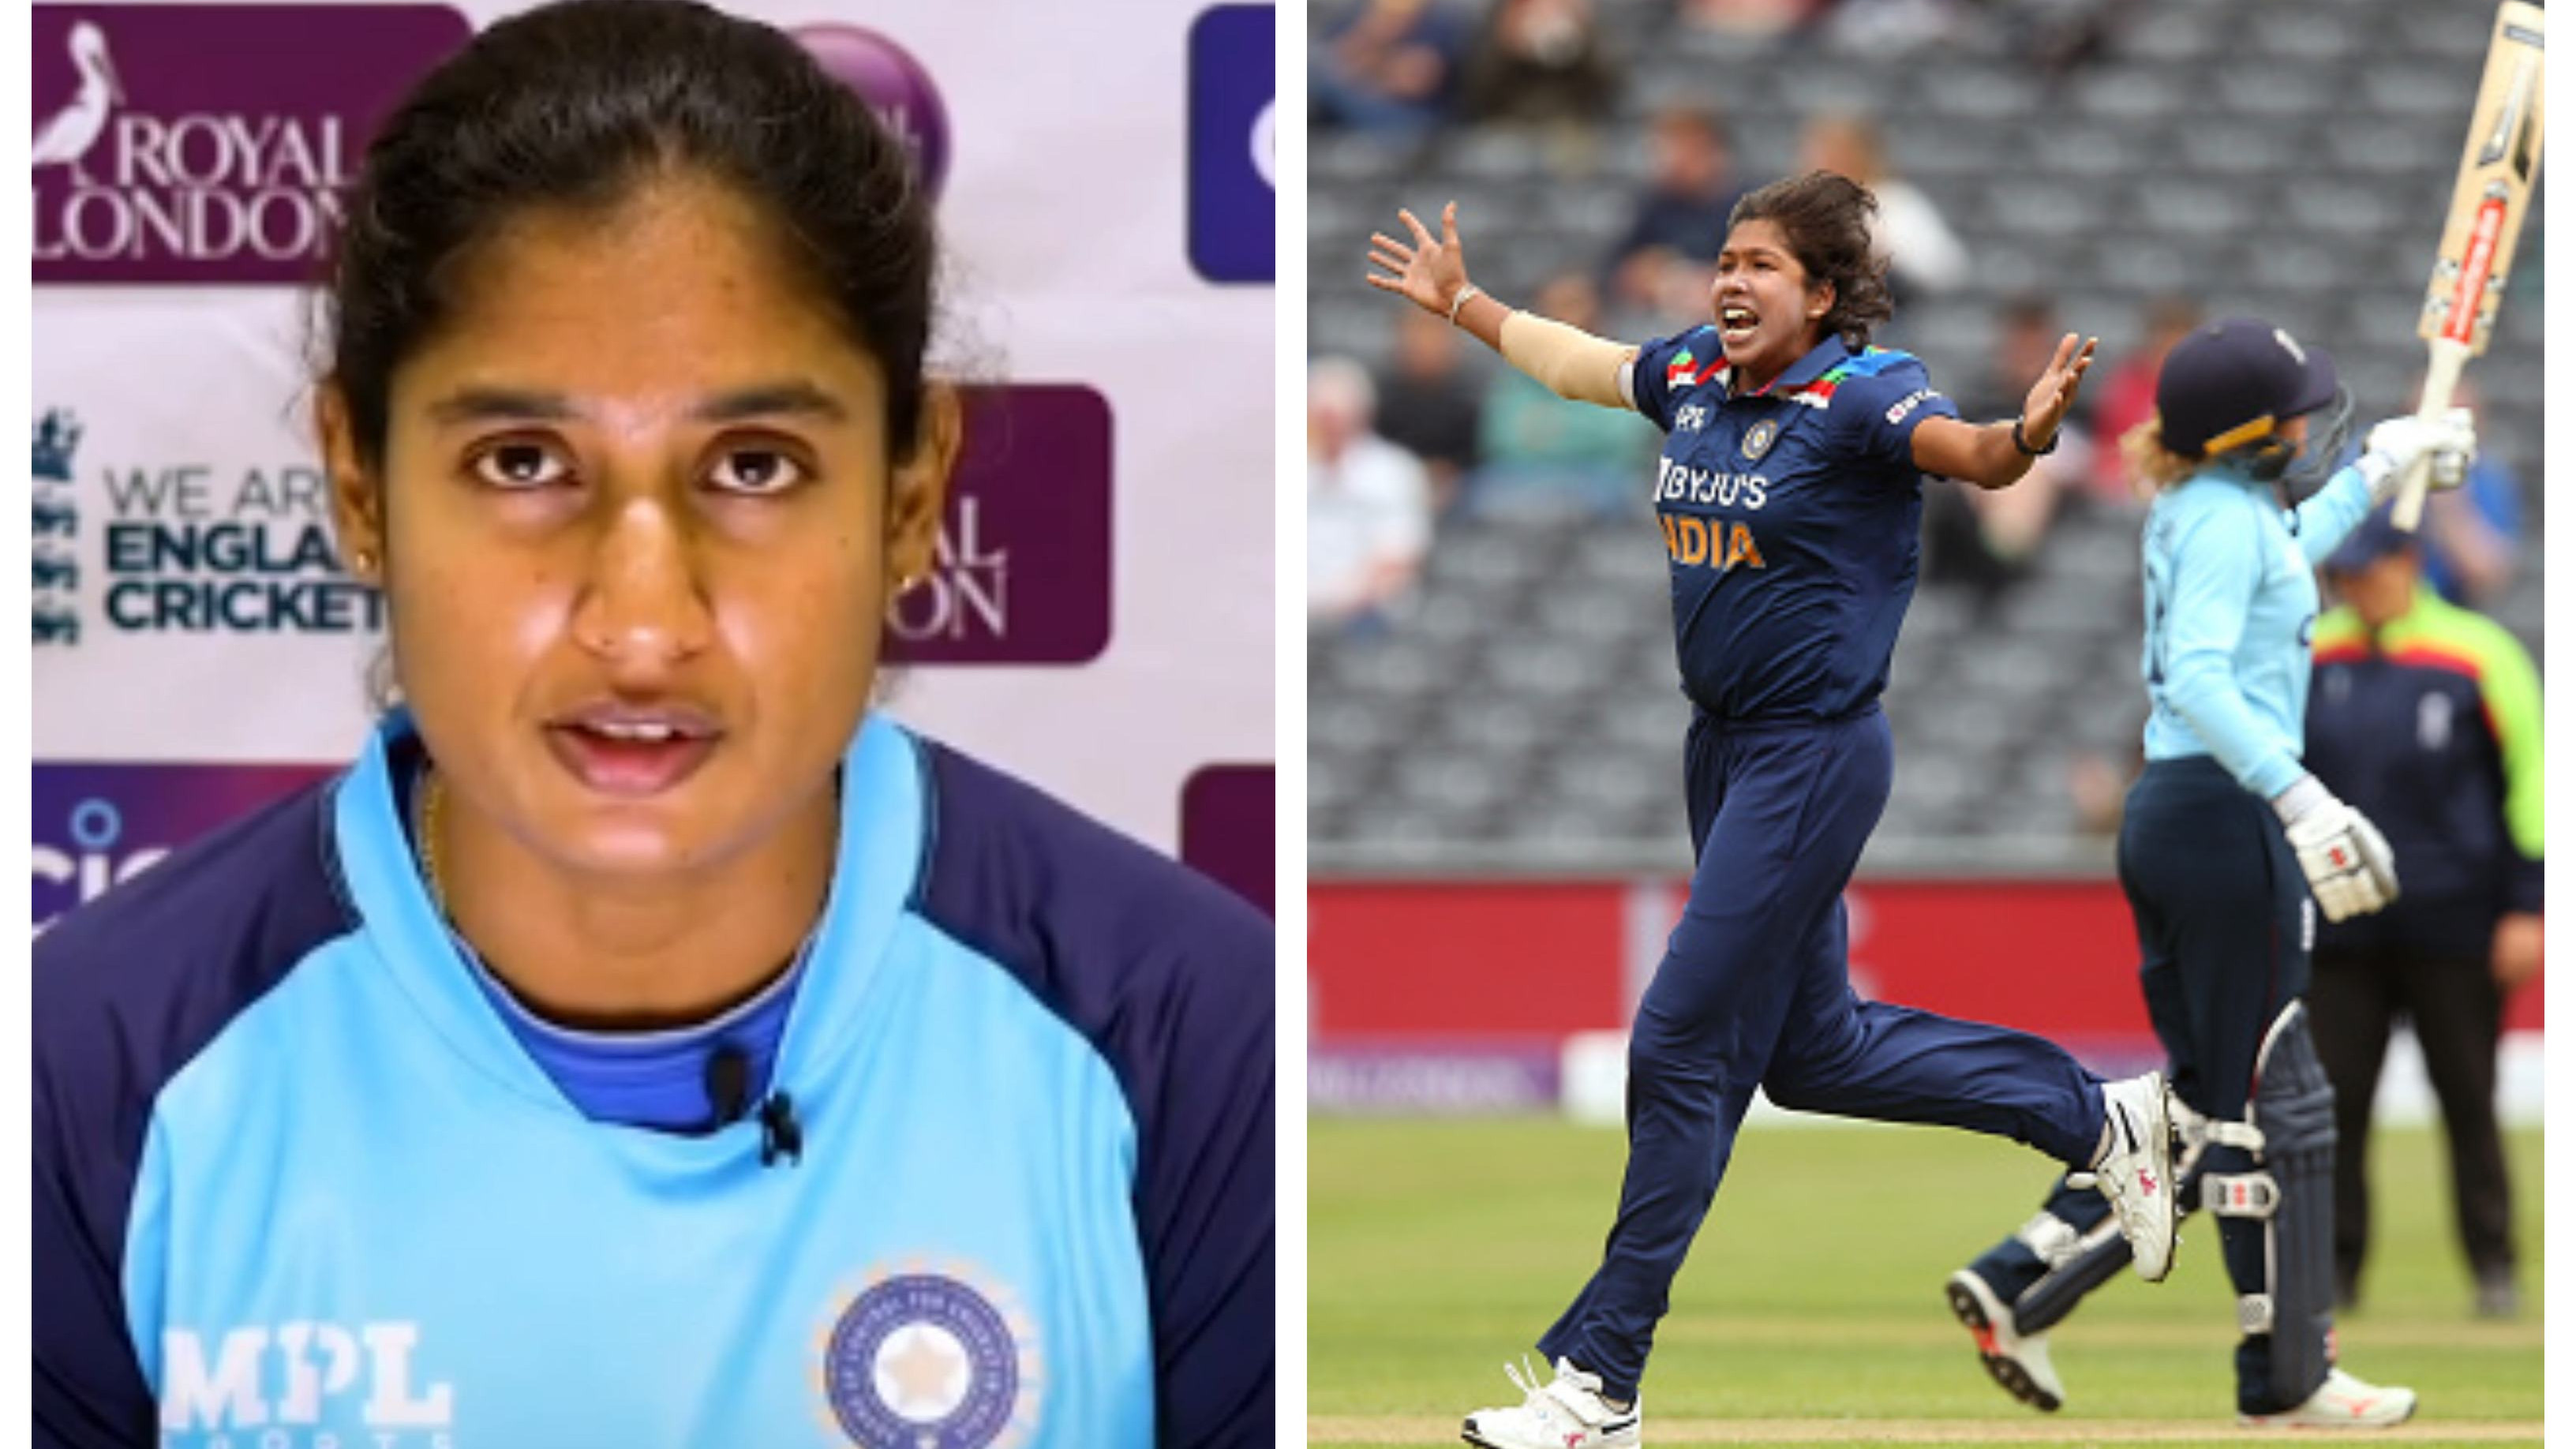 ENGW v INDW 2021: ‘We need to groom fast bowlers other than Jhulan’, Mithali Raj after India’s loss in 1st ODI